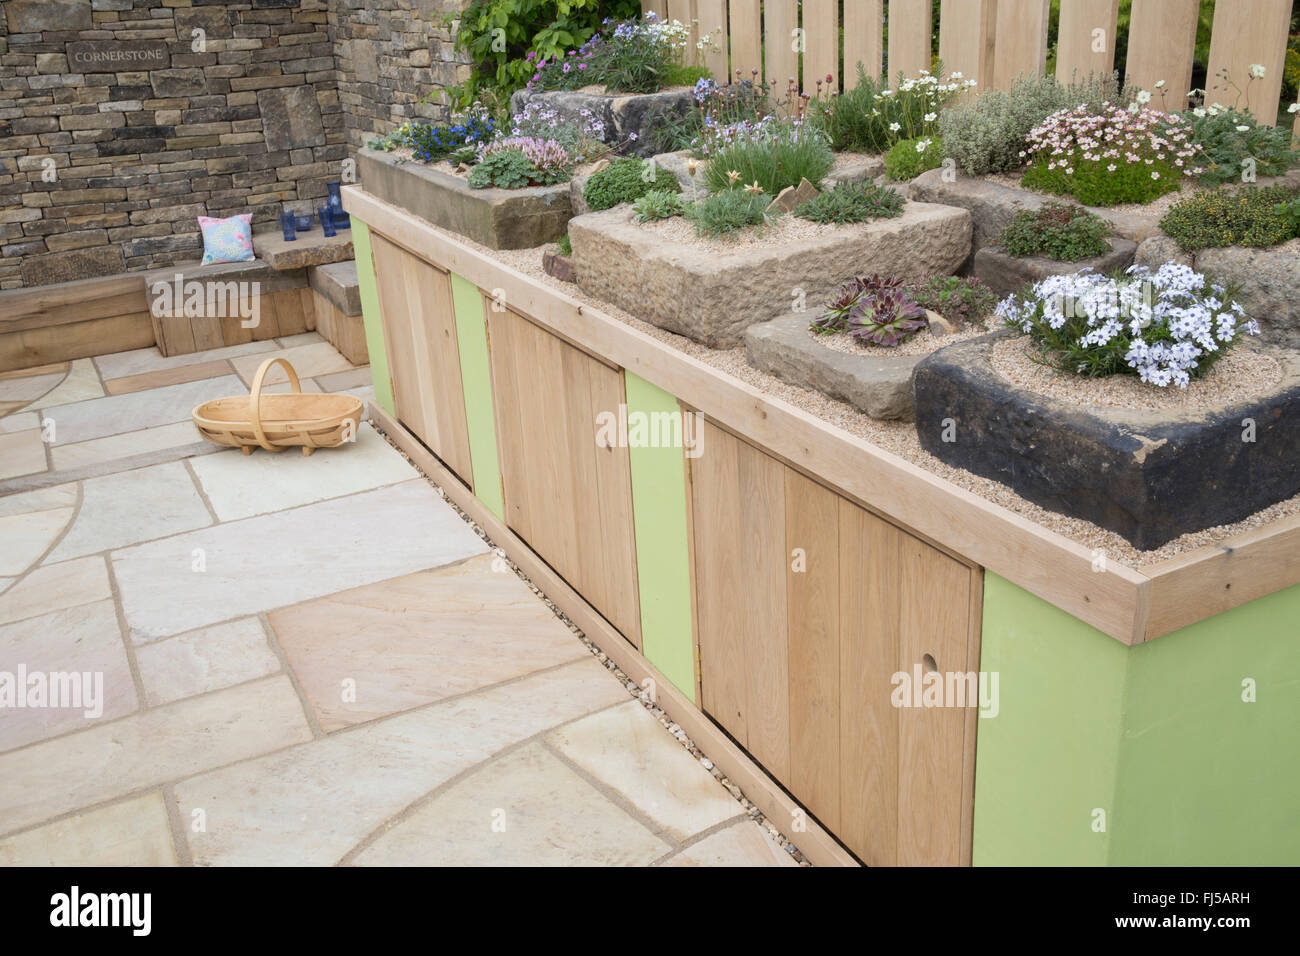 Small urban garden stone slabs patio storage cupboards a display of alpine plants in stone troughs containers container - seating area stone bench UK Stock Photo